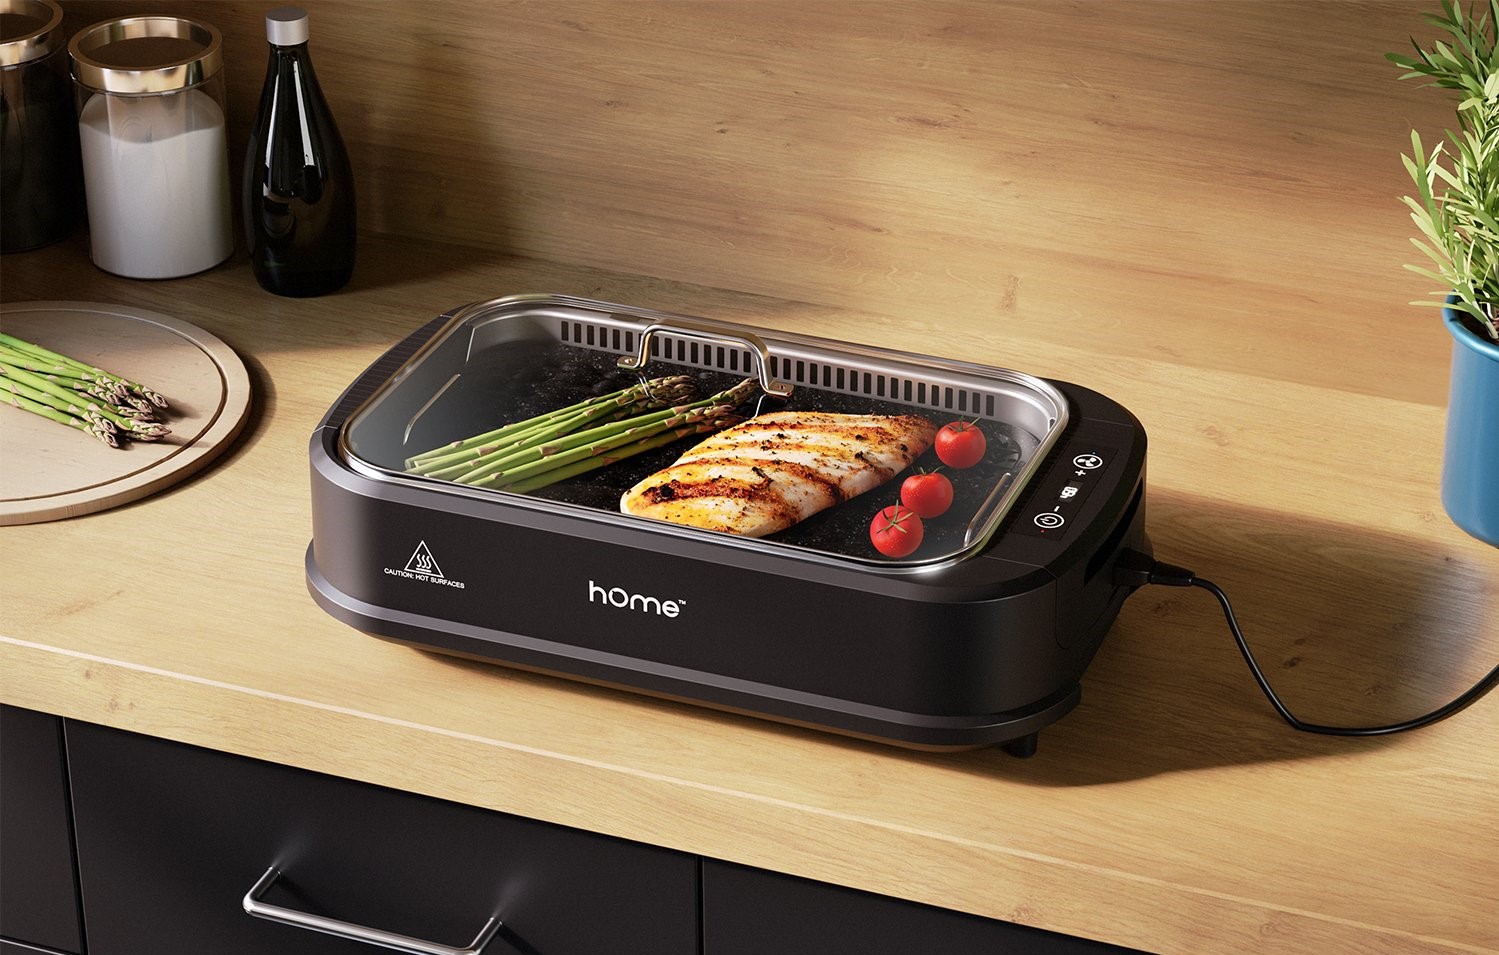 Homelabs Smokeless Indoor Grill Review: good value but with some drawbacks